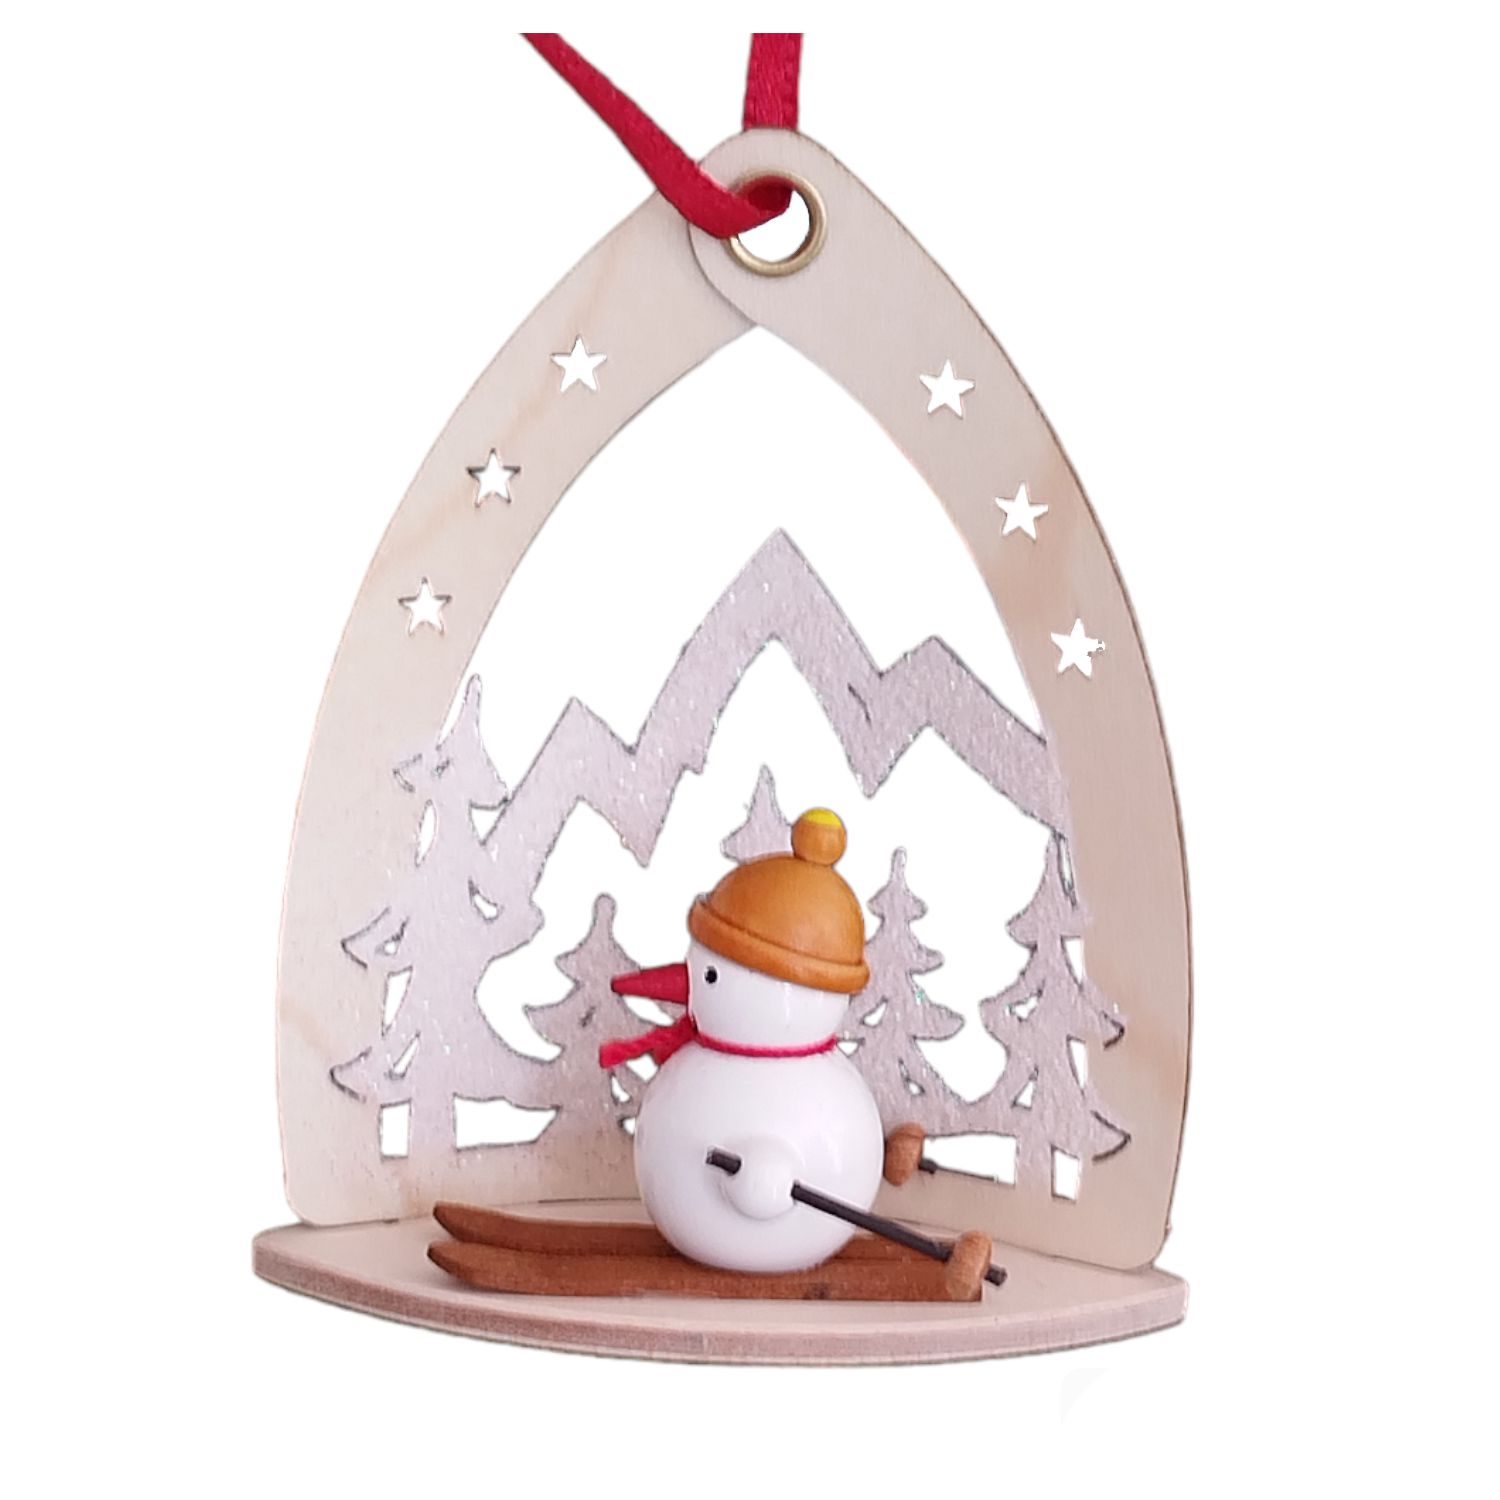 Tree hanging snowman in front of winter landscape, yellow